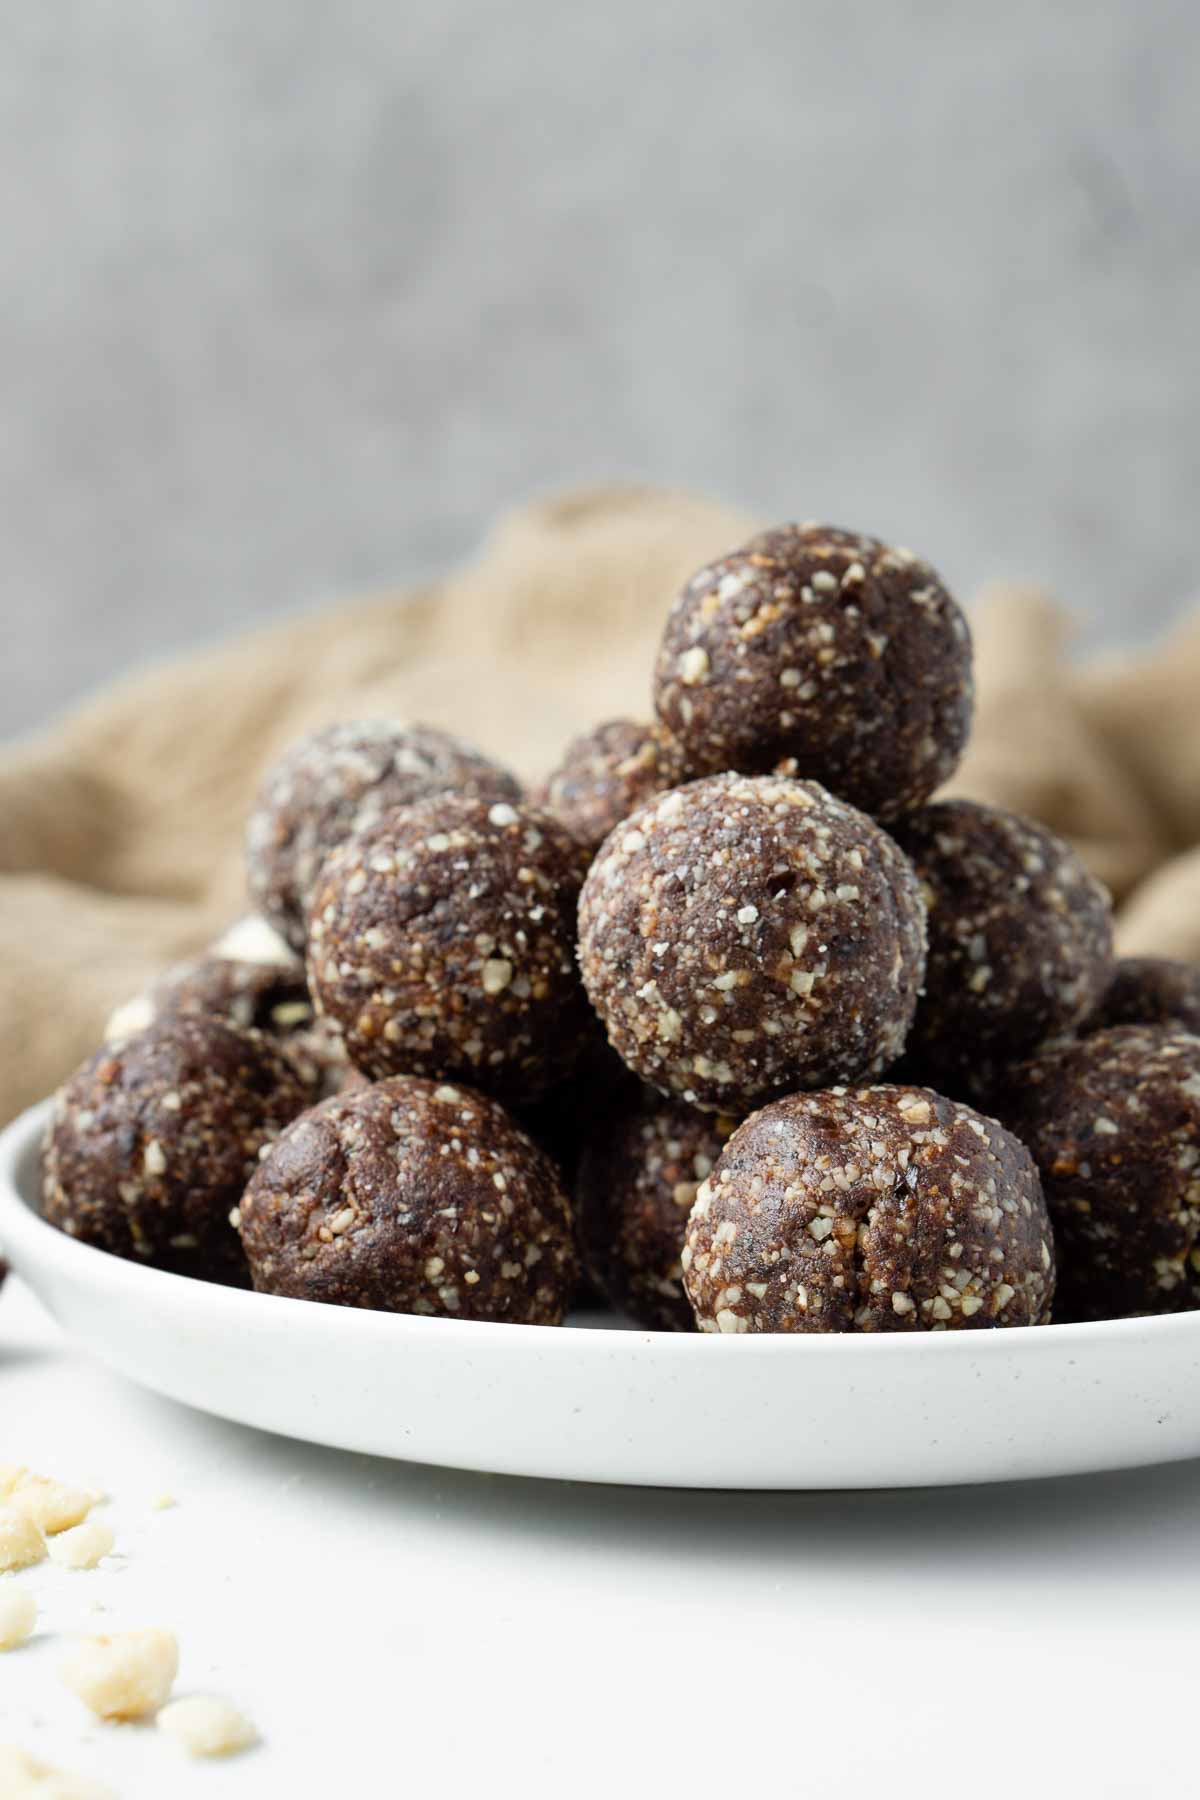 Chocolate Hazelnut Bliss Balls in a pile on a plate ready to eat.